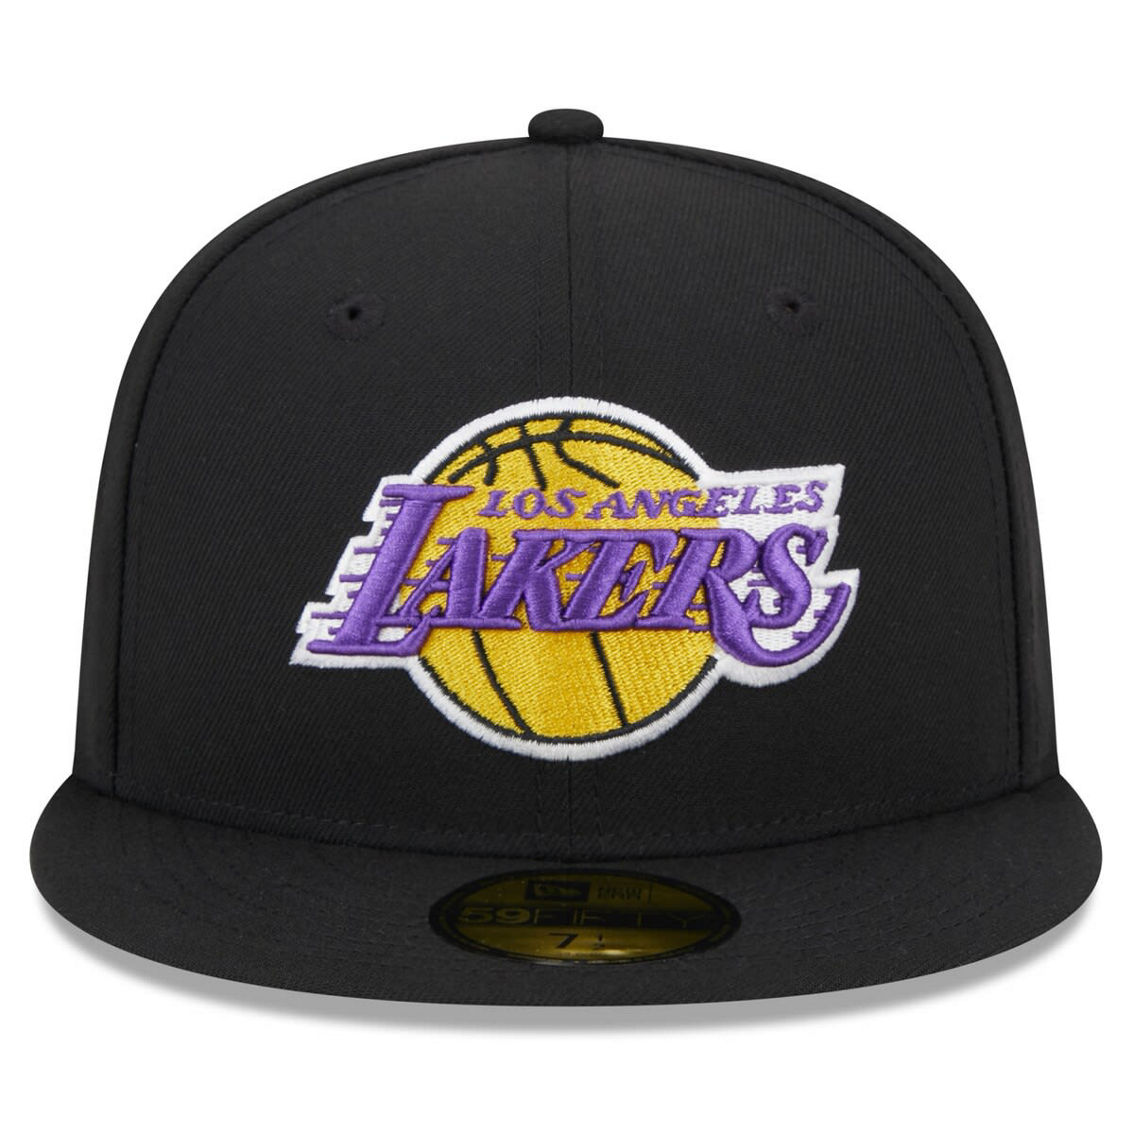 New Era Men's Black Los Angeles Lakers Rally Drive Side Patch 59FIFTY Fitted Hat - Image 3 of 4